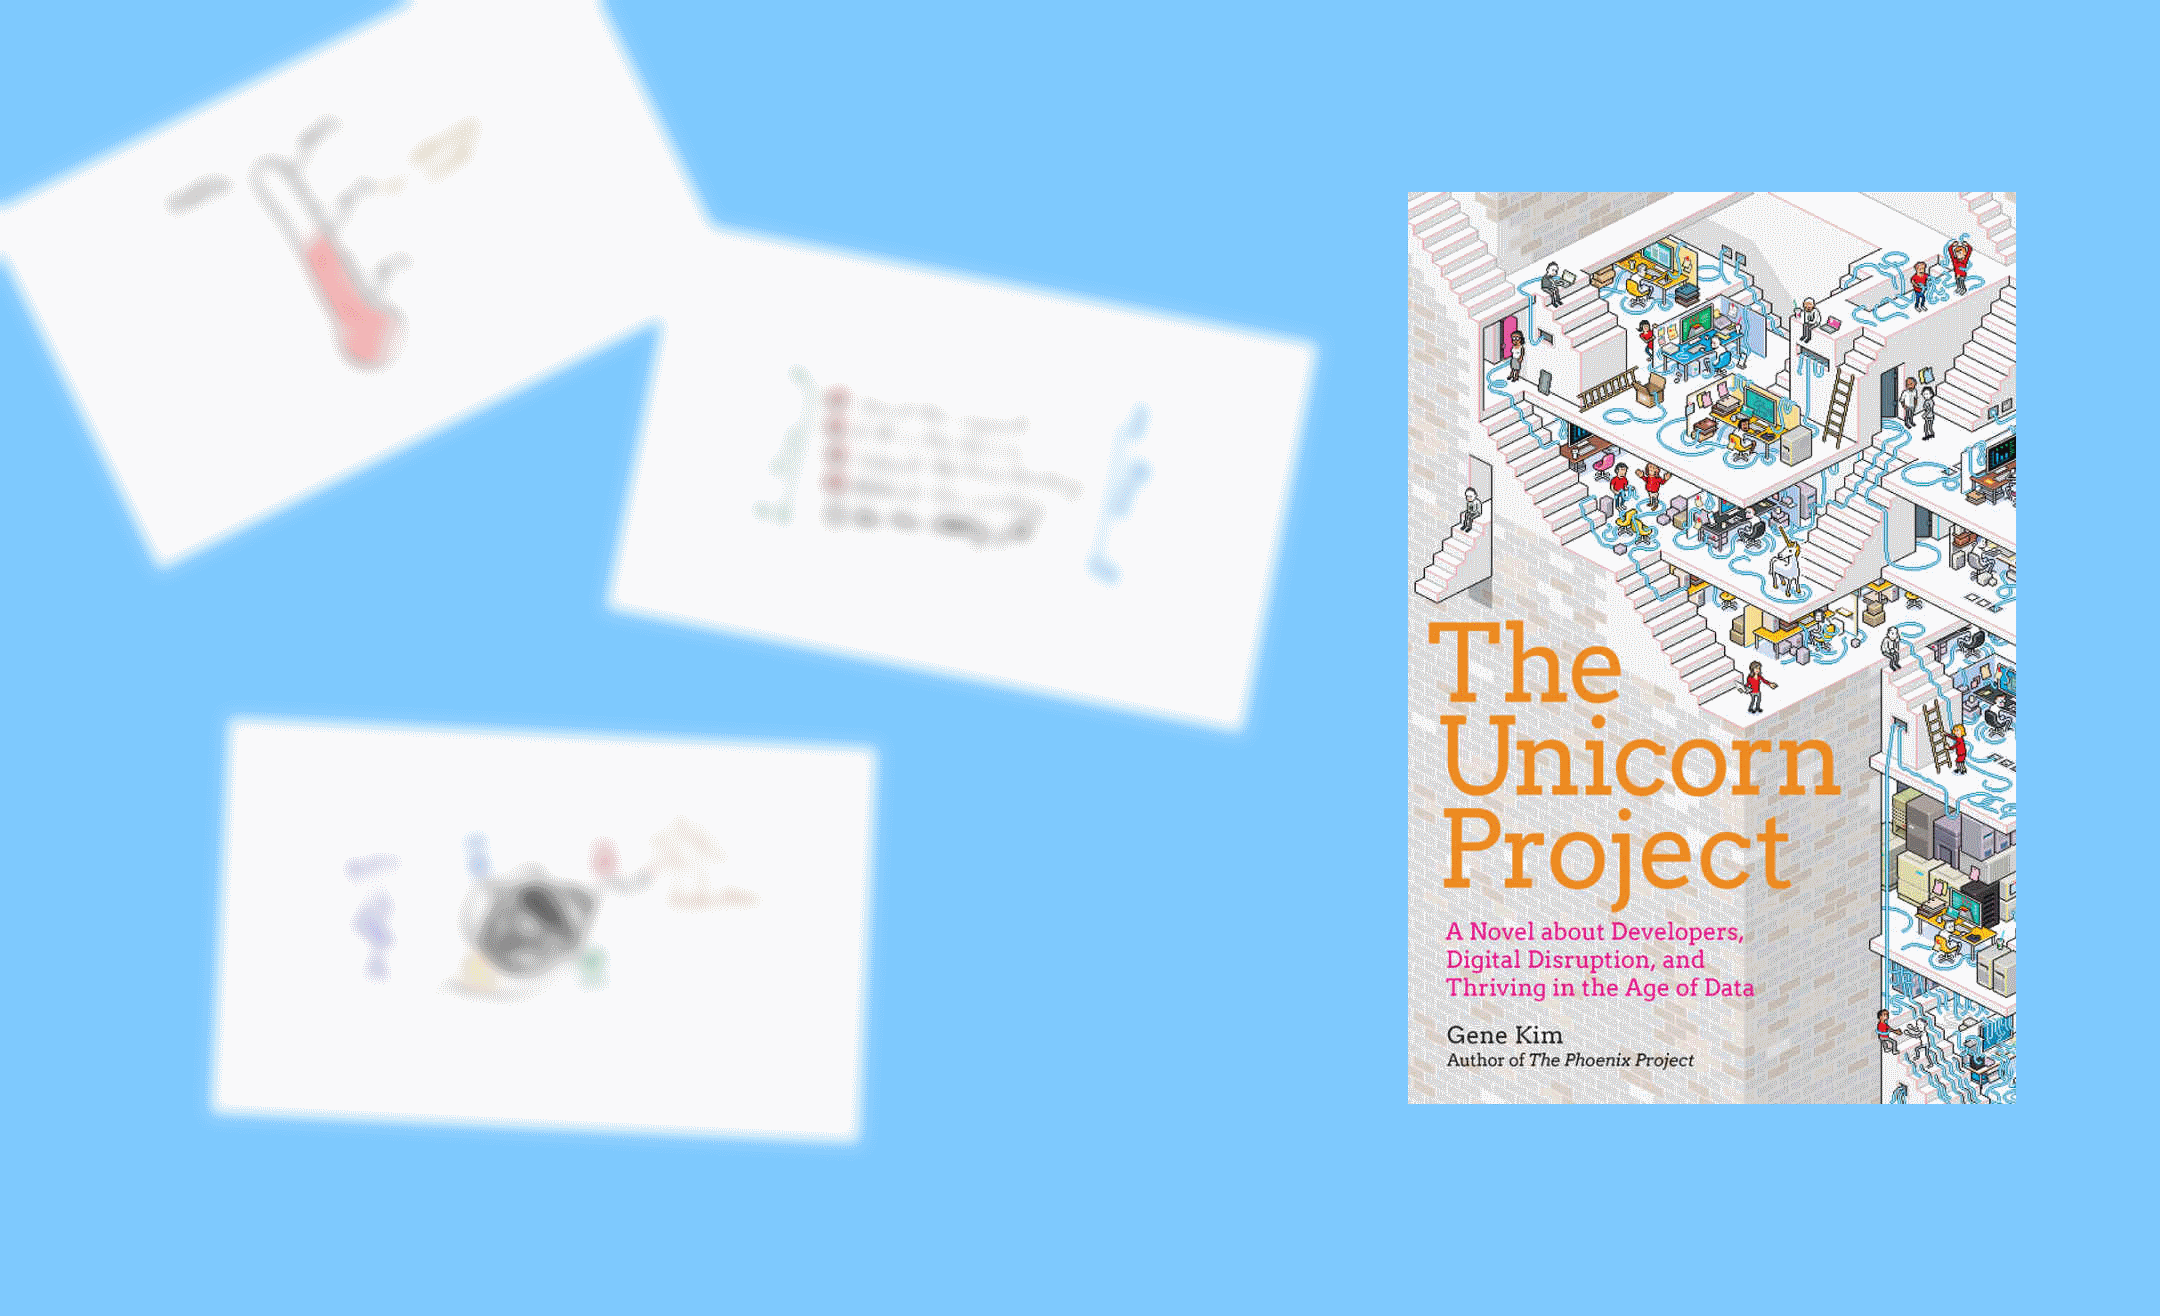 Notes on “The Unicorn Project” by Gene Kim (Book Review)